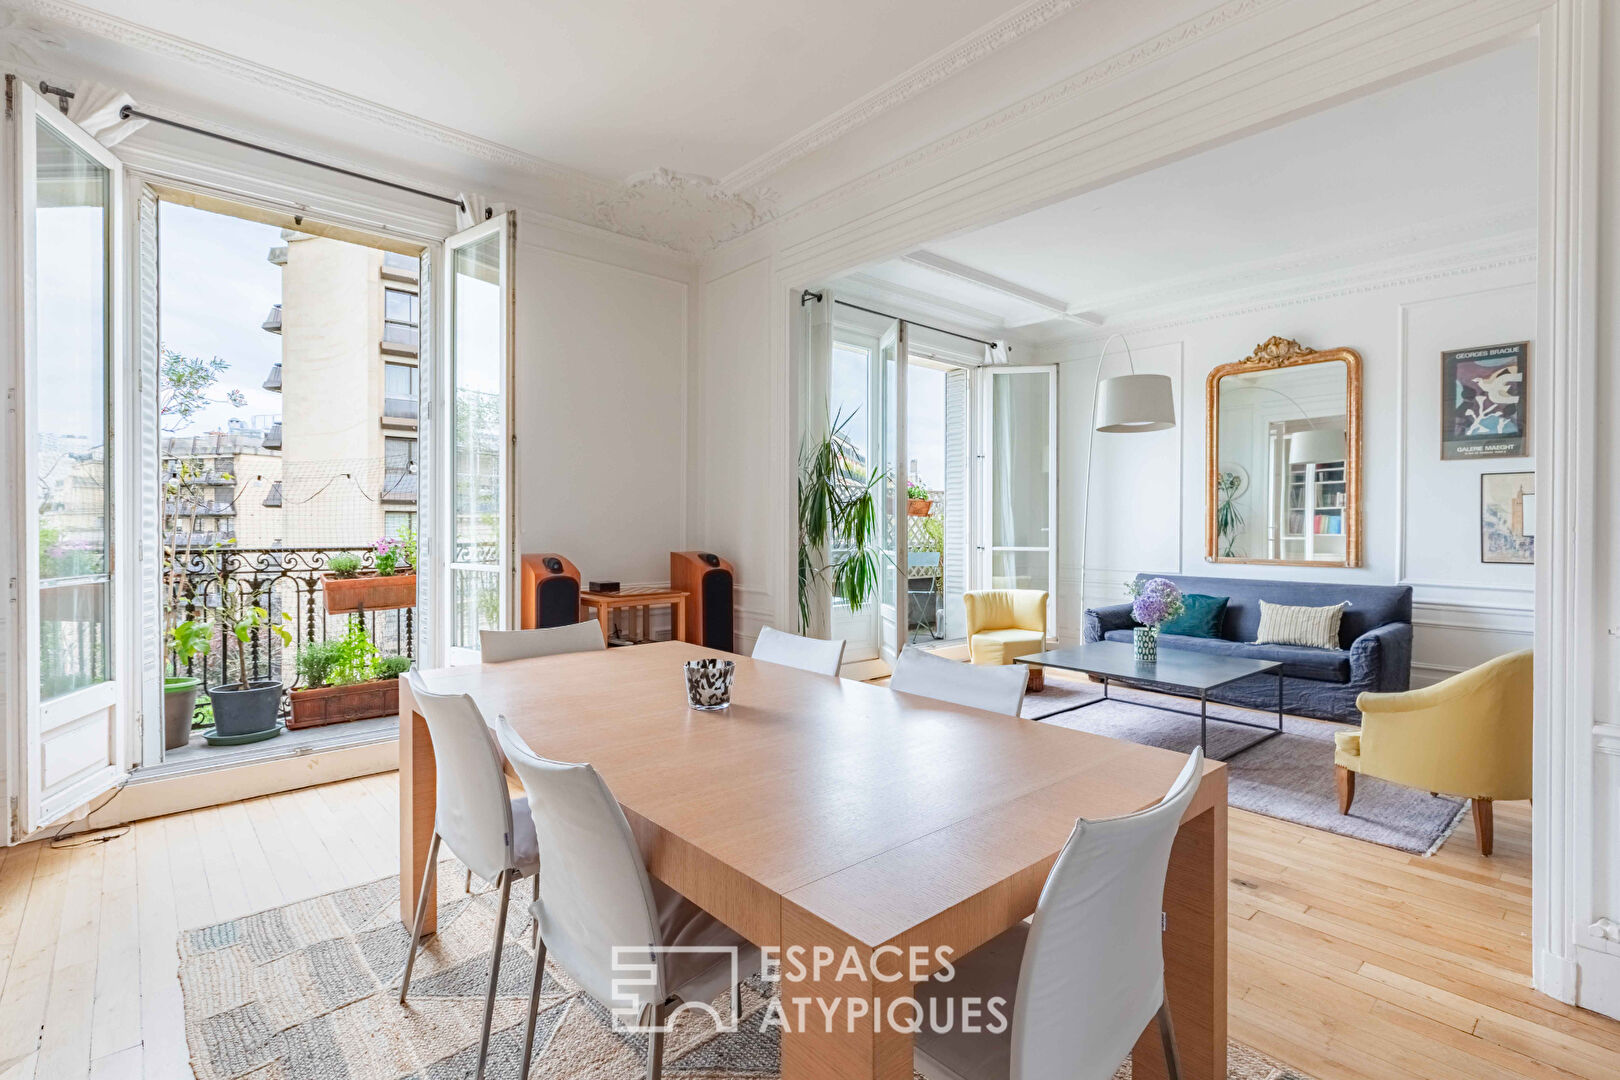 Haussmannian duplex on a high floor with south-facing balconies in Auteuil Nord